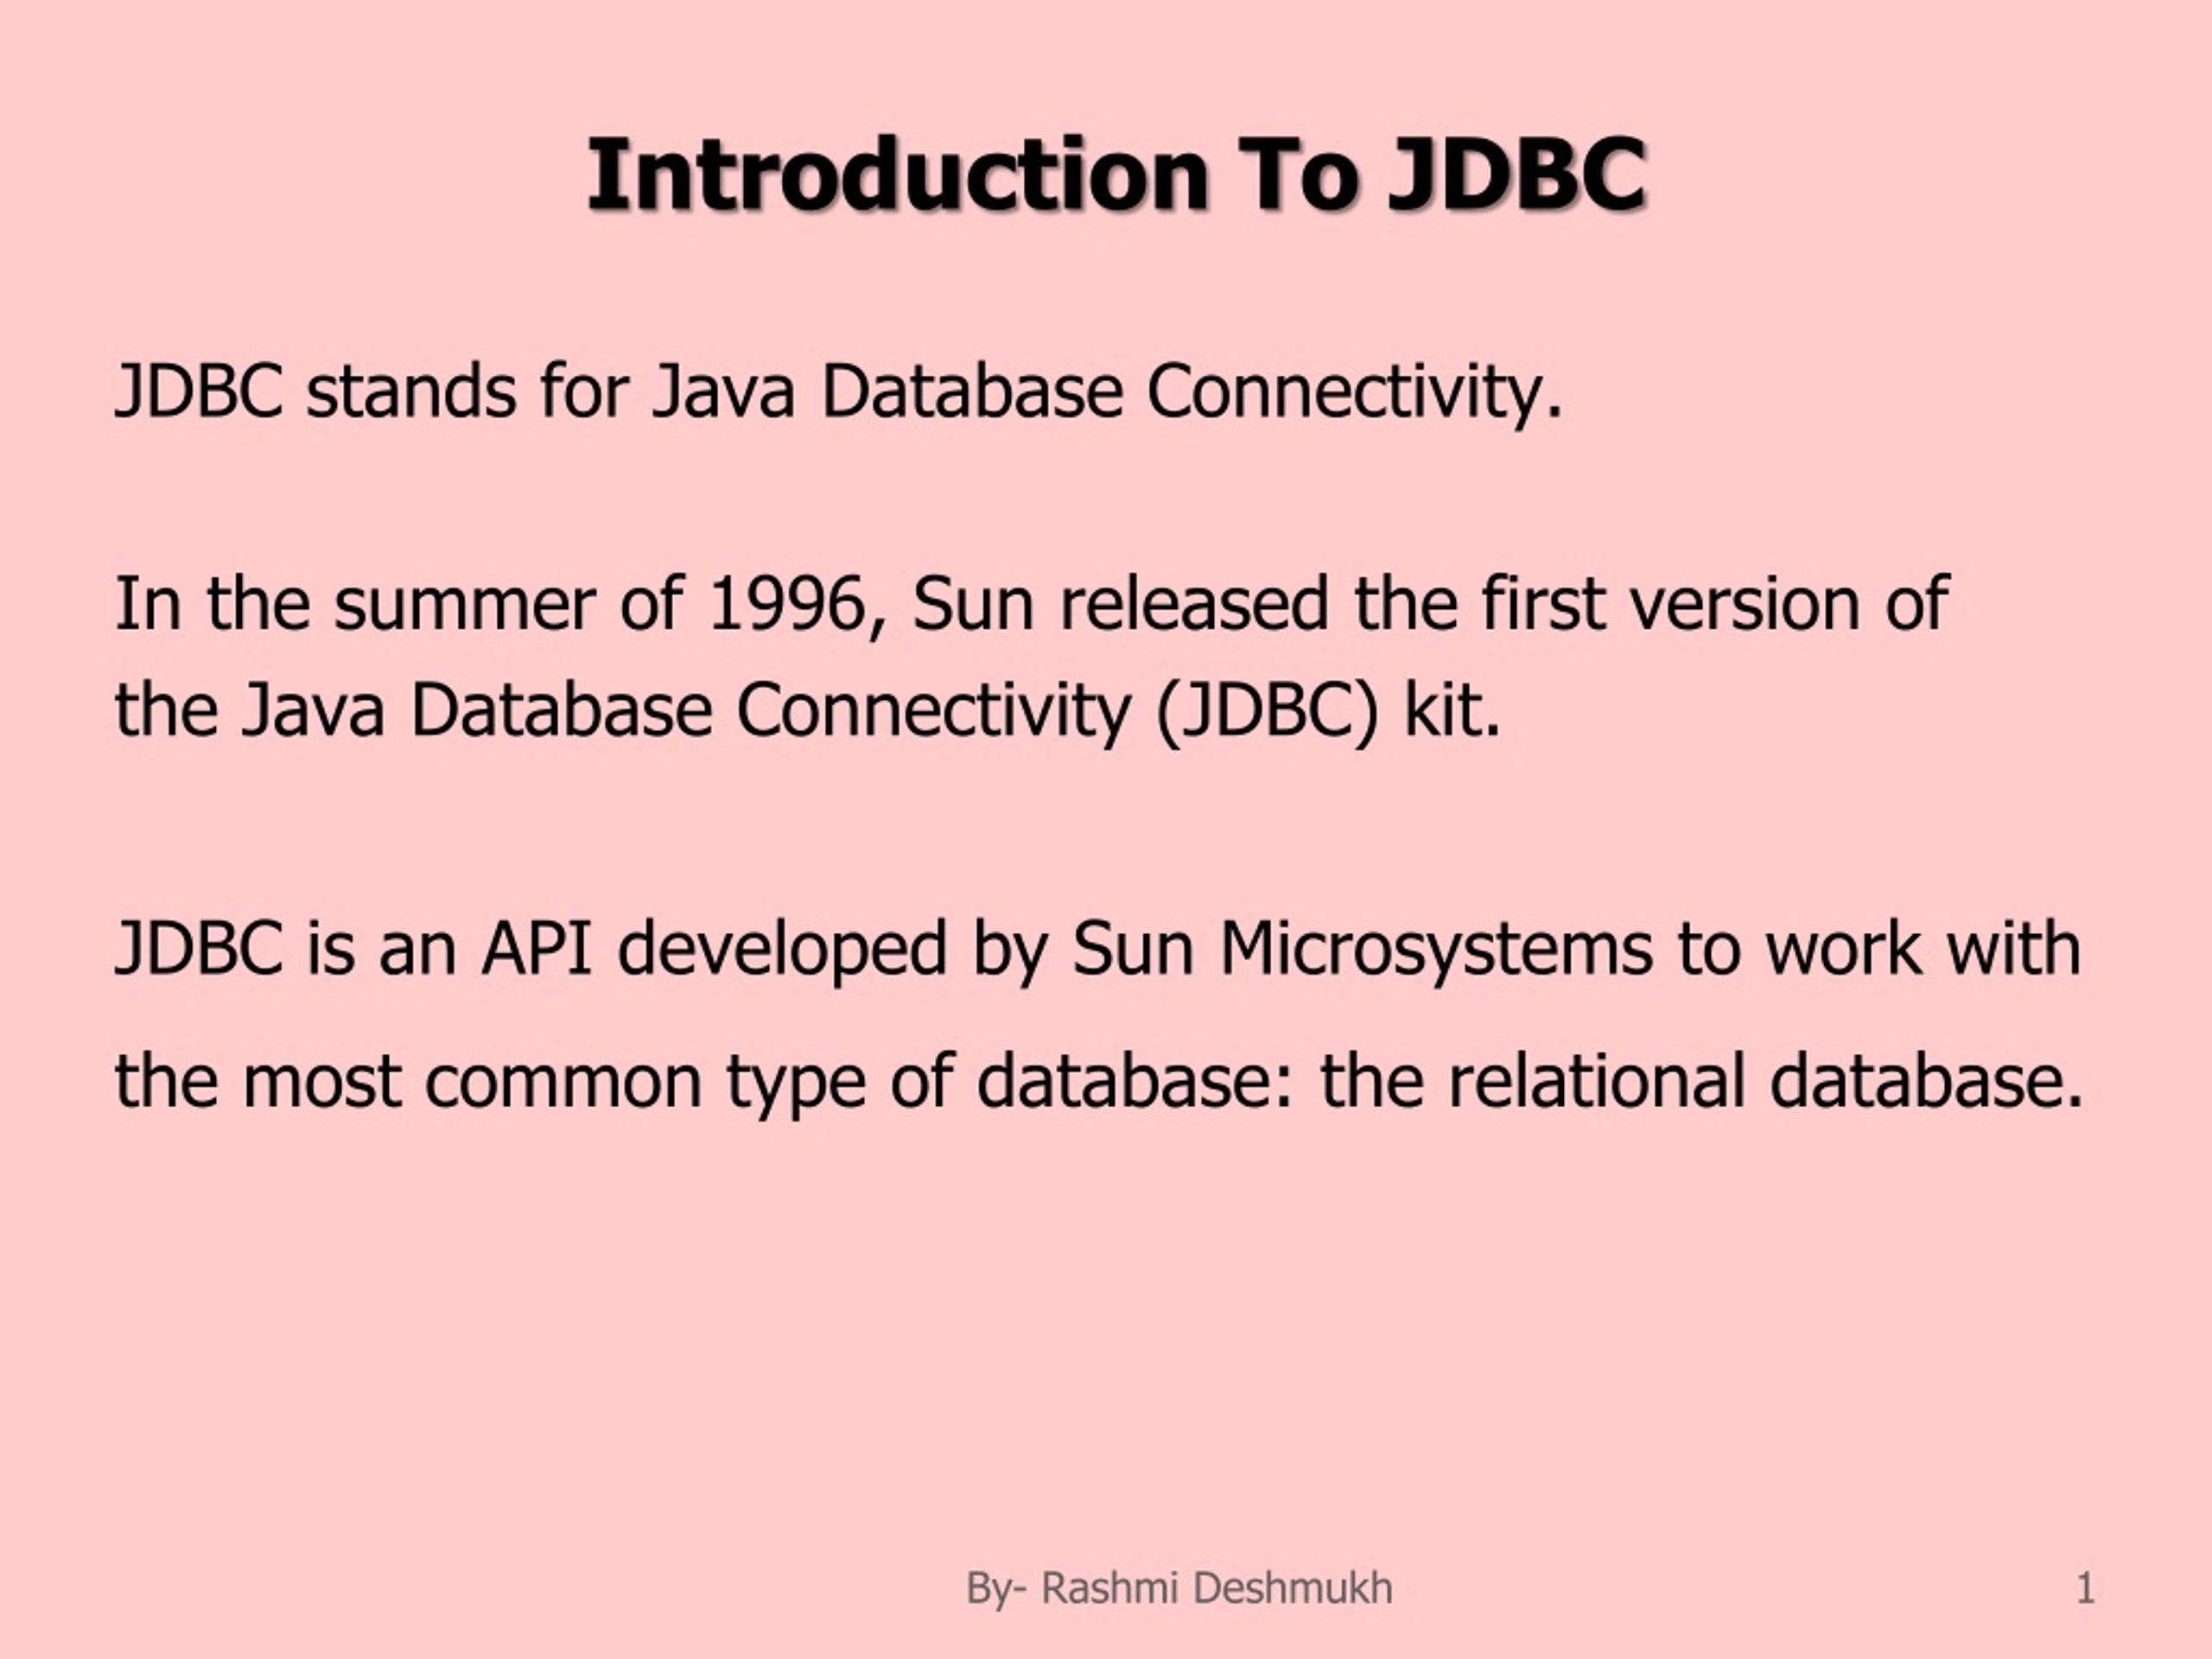 Ppt Introduction To Jdbc Powerpoint Presentation Free Download Id8785596 0921